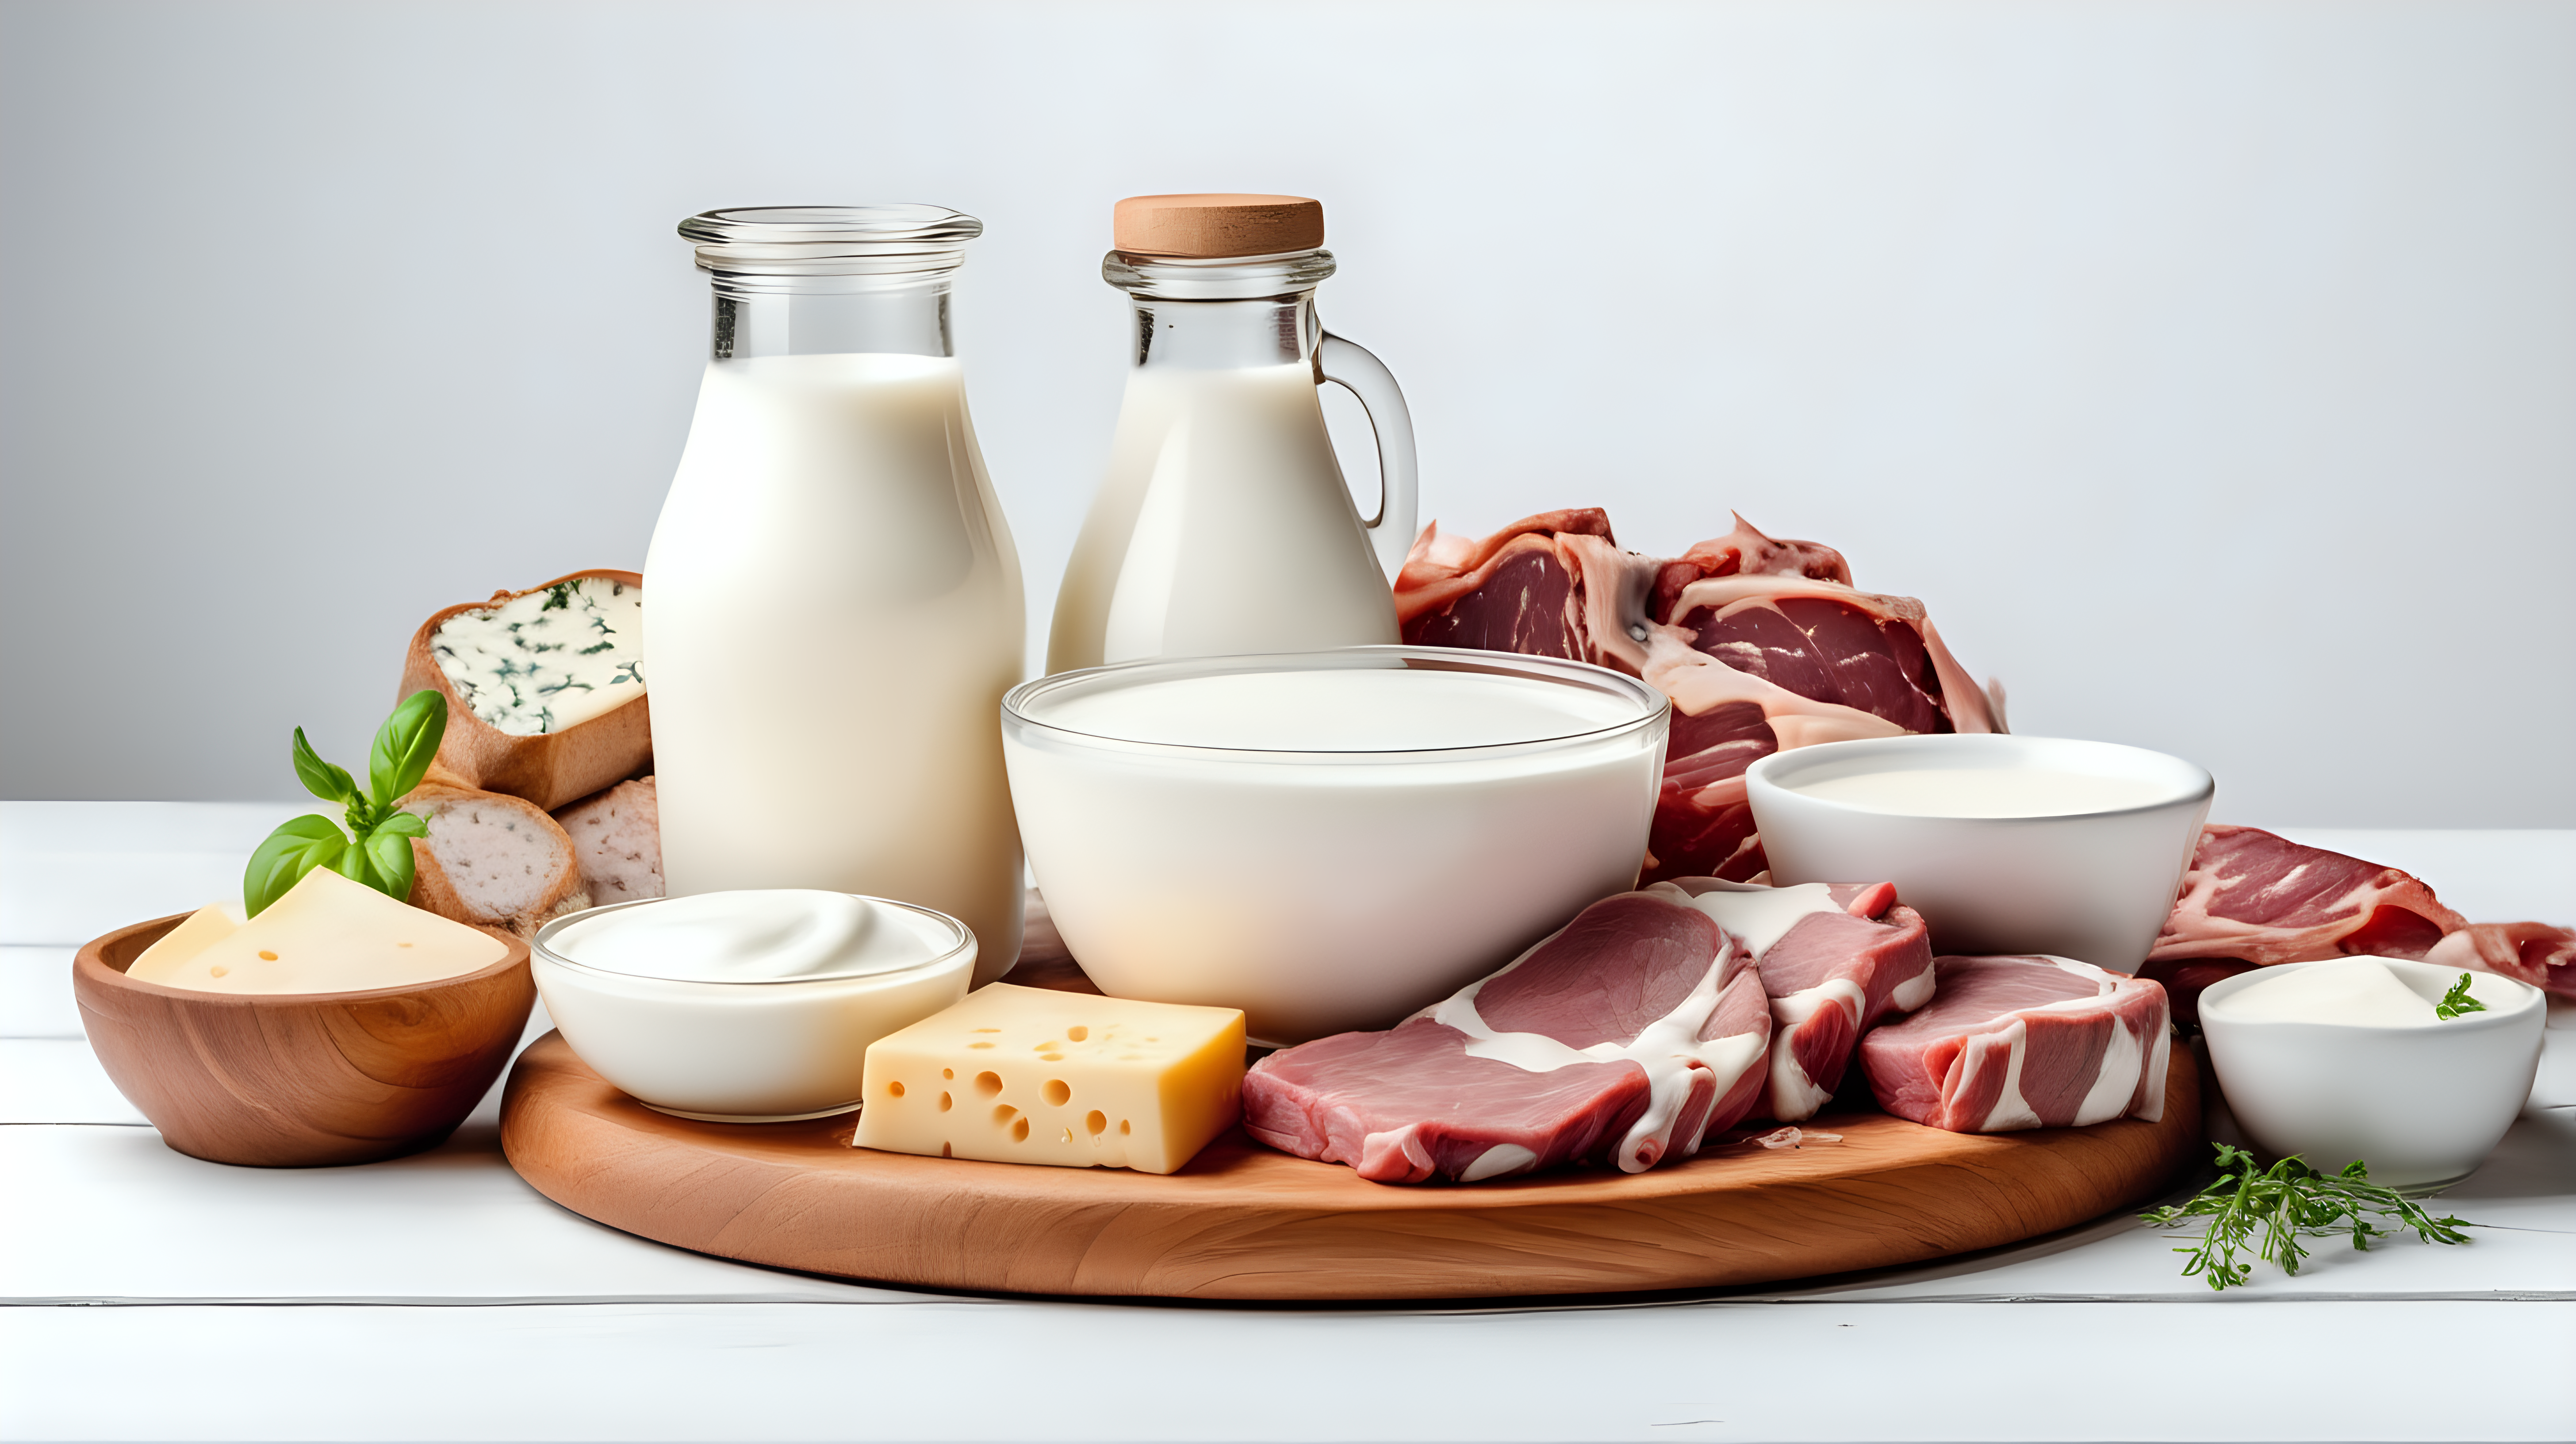 product of goat, milk, meat, cheese, yogurt on wooden table, isolated on white background, copy space